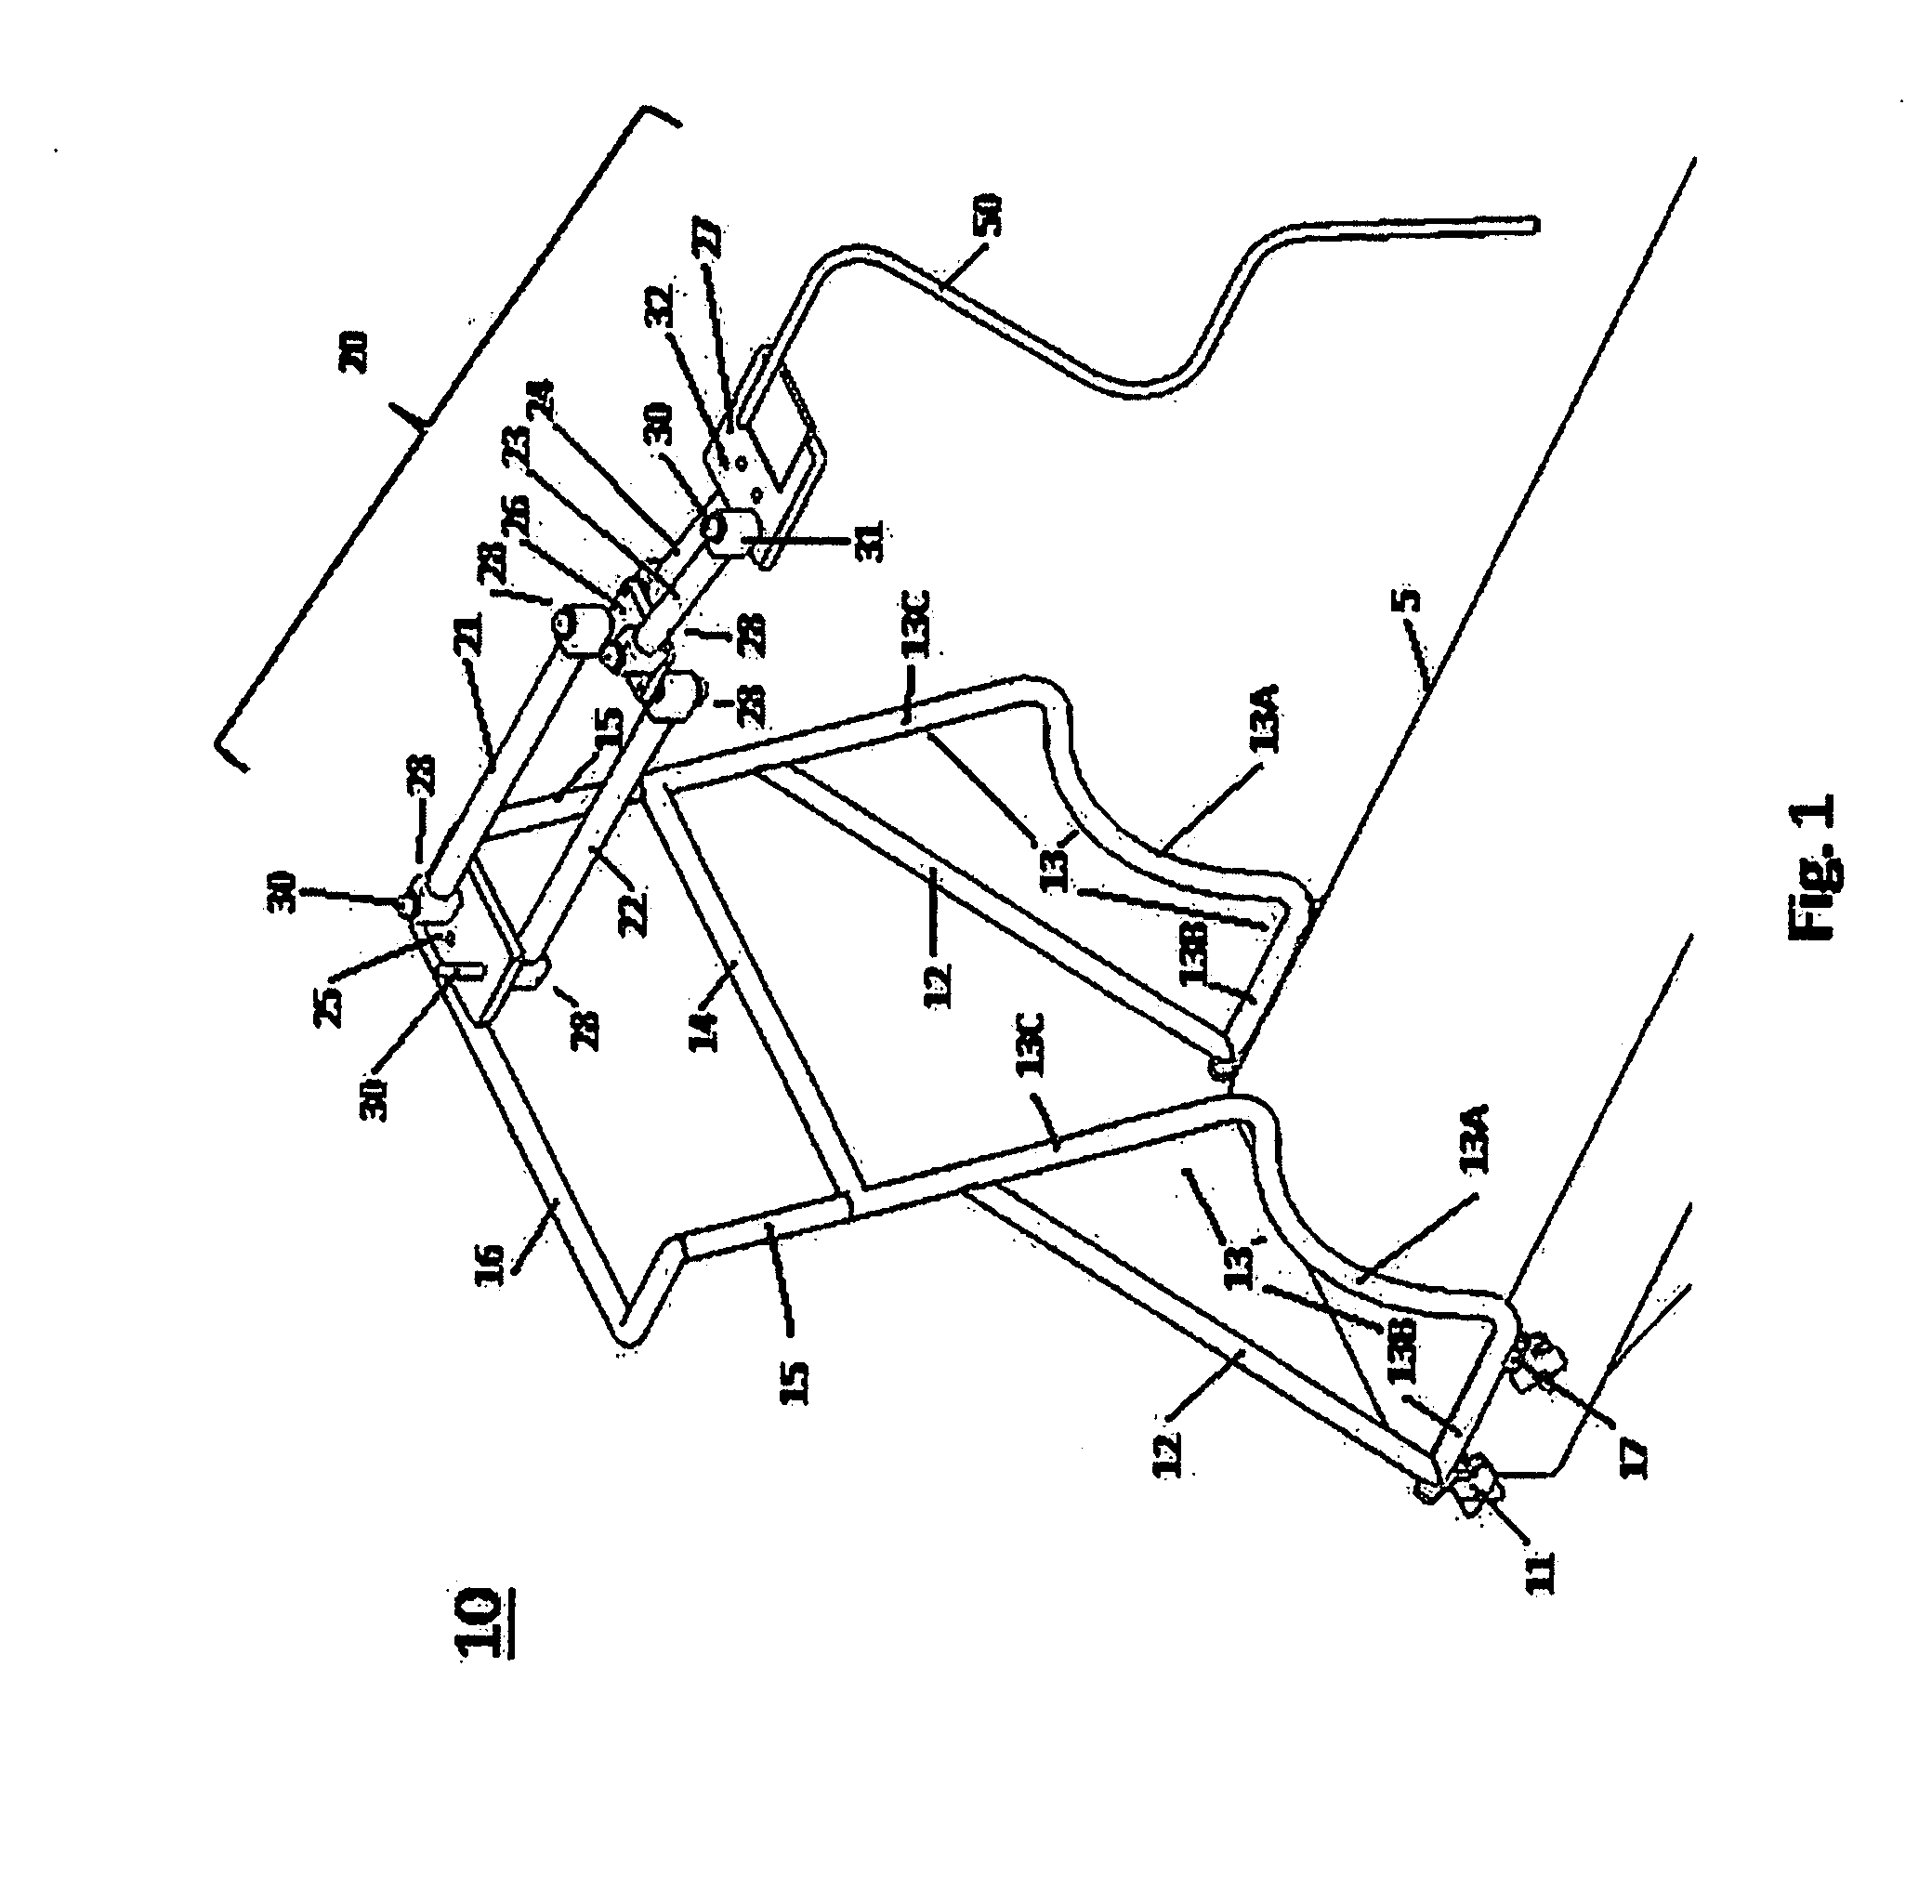 Surgical equipment supporting frames and attachments for same